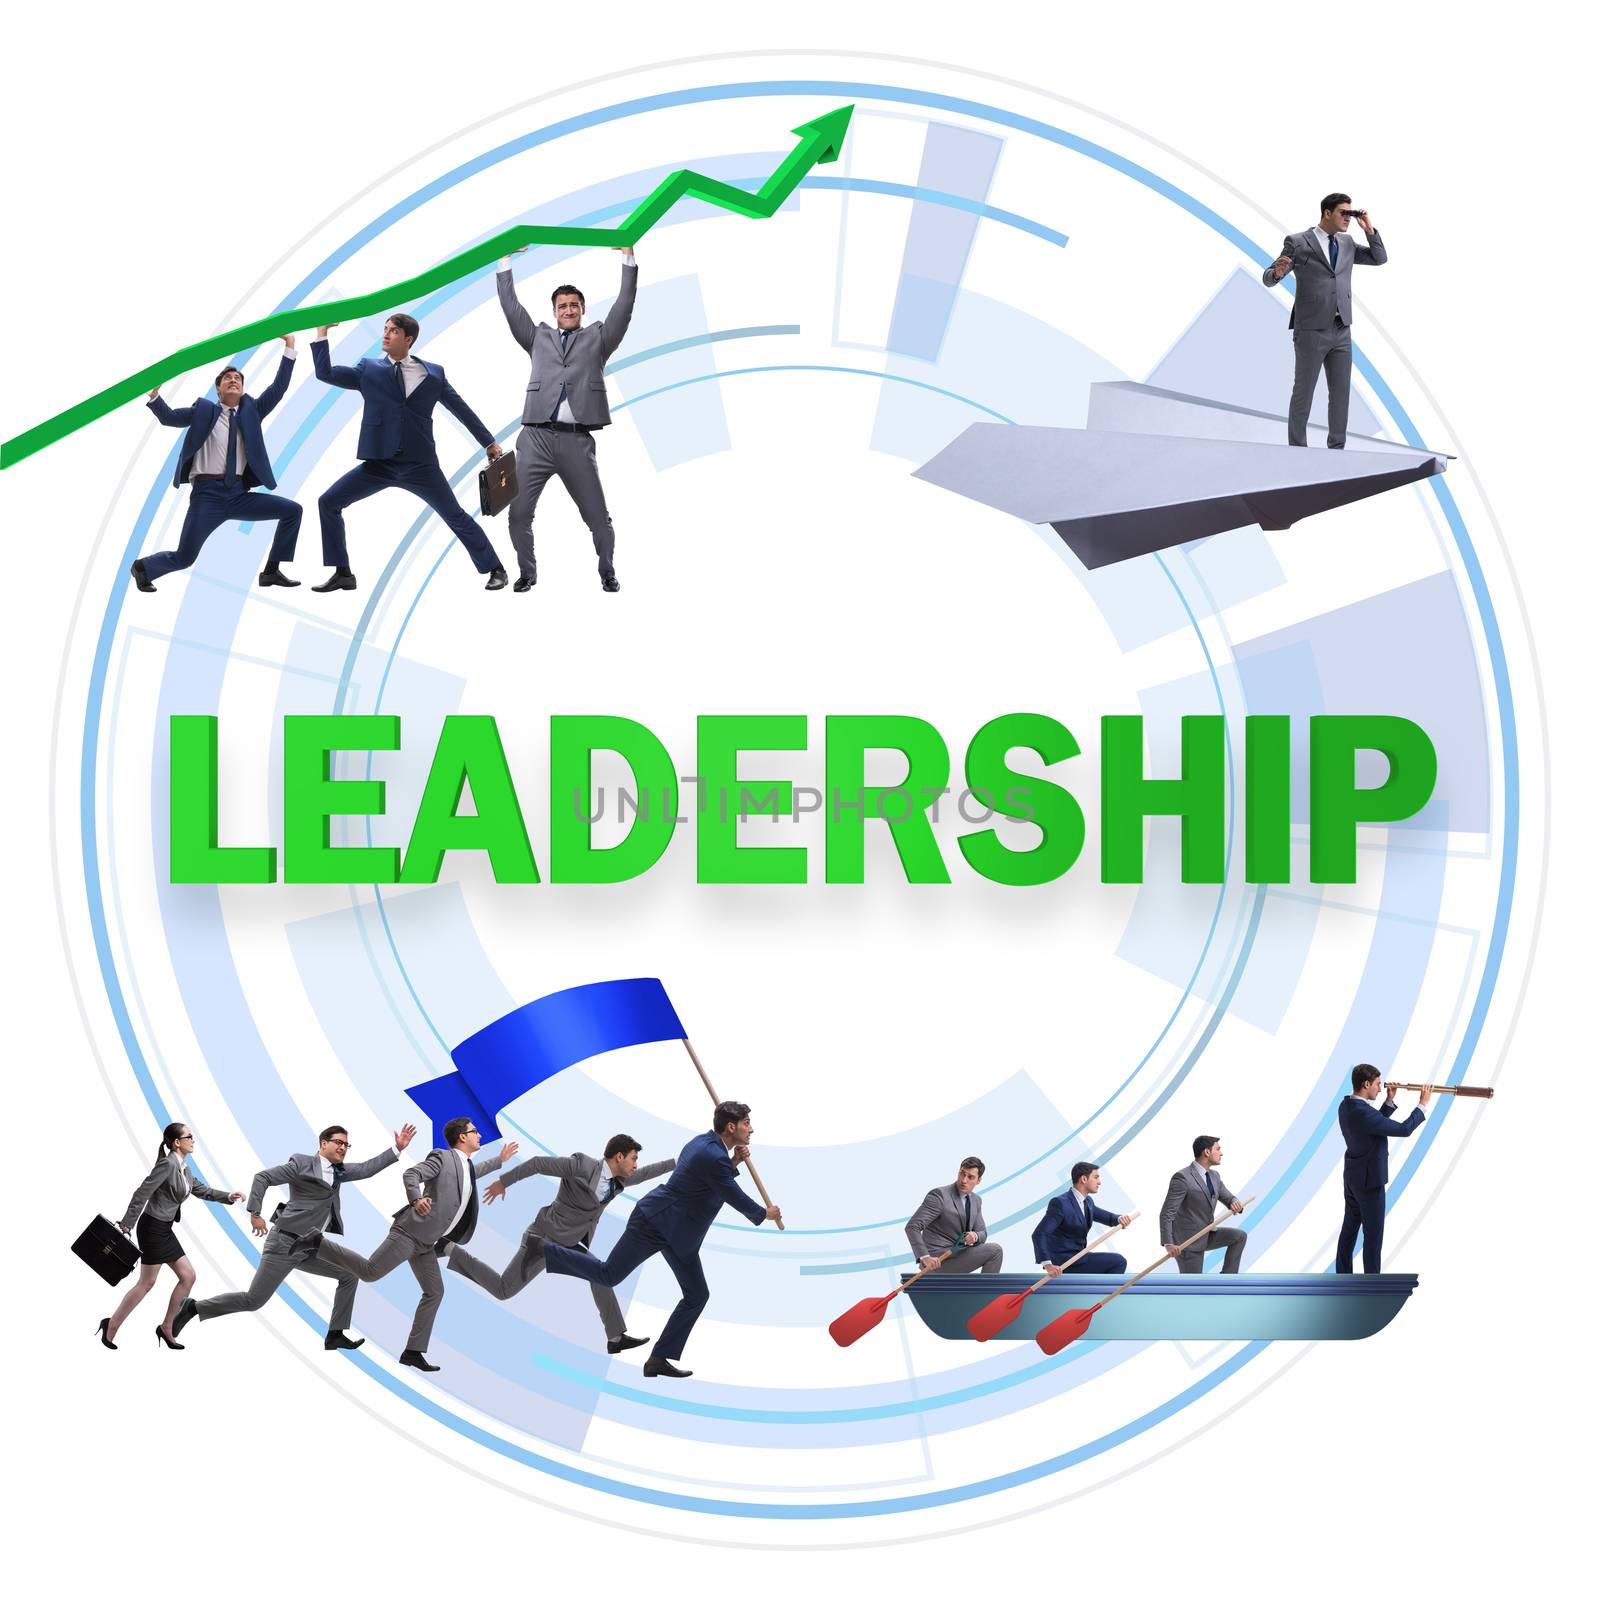 Concept of leadership with many business situations